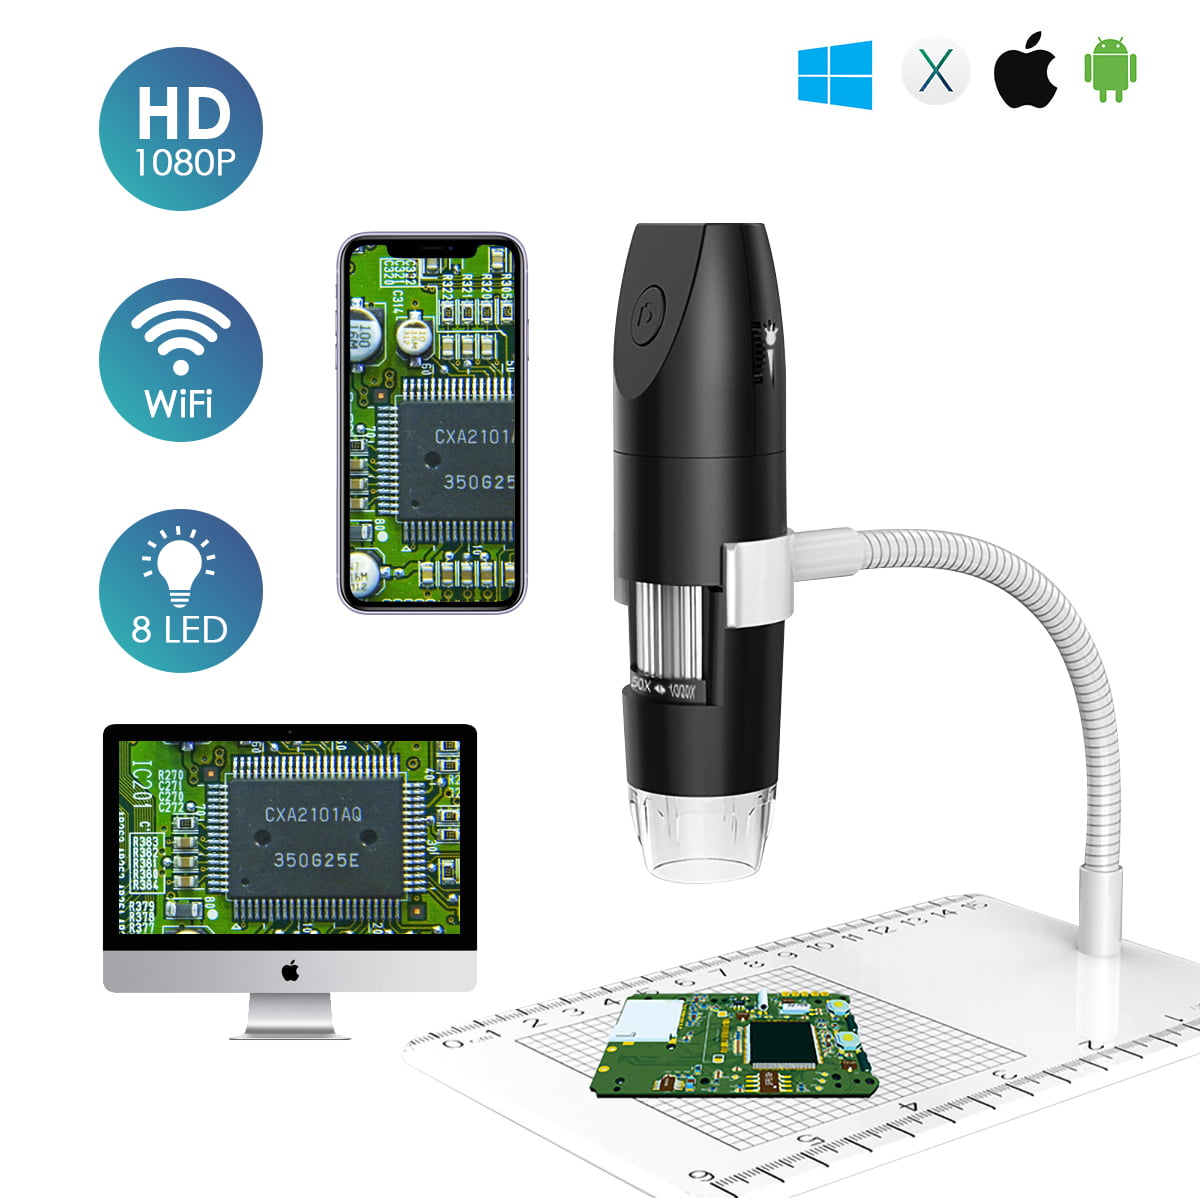 DOOK 4.3 inch Screen Full Color LCD Digital USB Microscope,WiFi Wireless 50X PCB Coins Magnify for Windows Mac 1000X Magnification Zoom Camera 1920X1080P Video Recording/Saving 